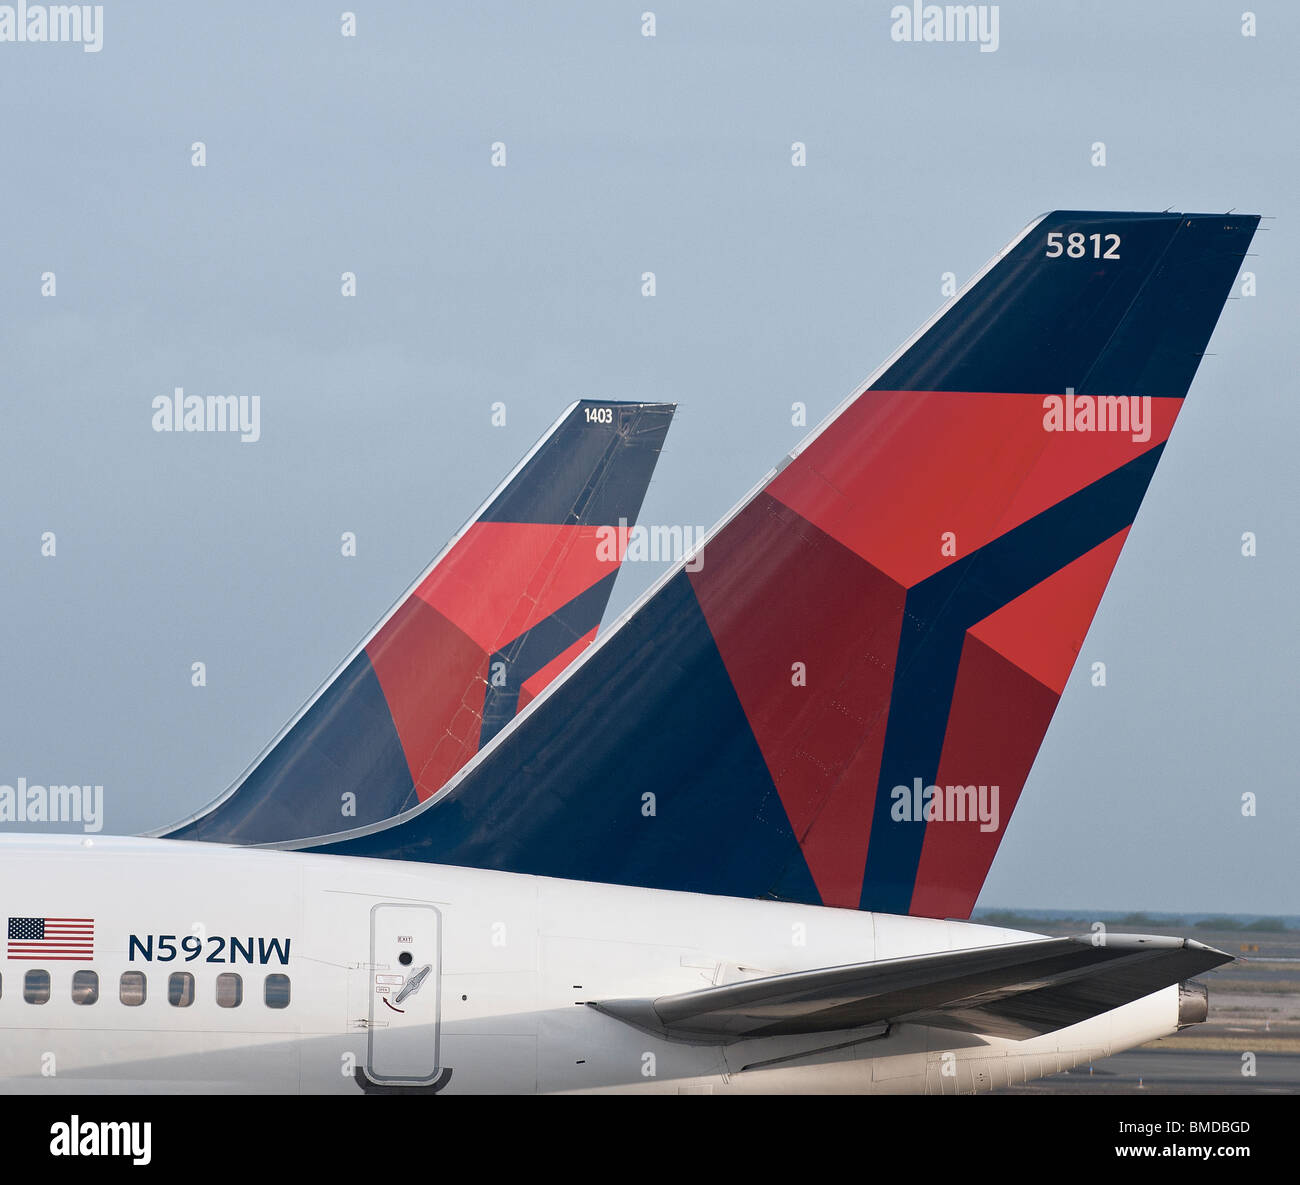 Delta Air Lines logos on the tail section of two of the company's passenger jets. Stock Photo